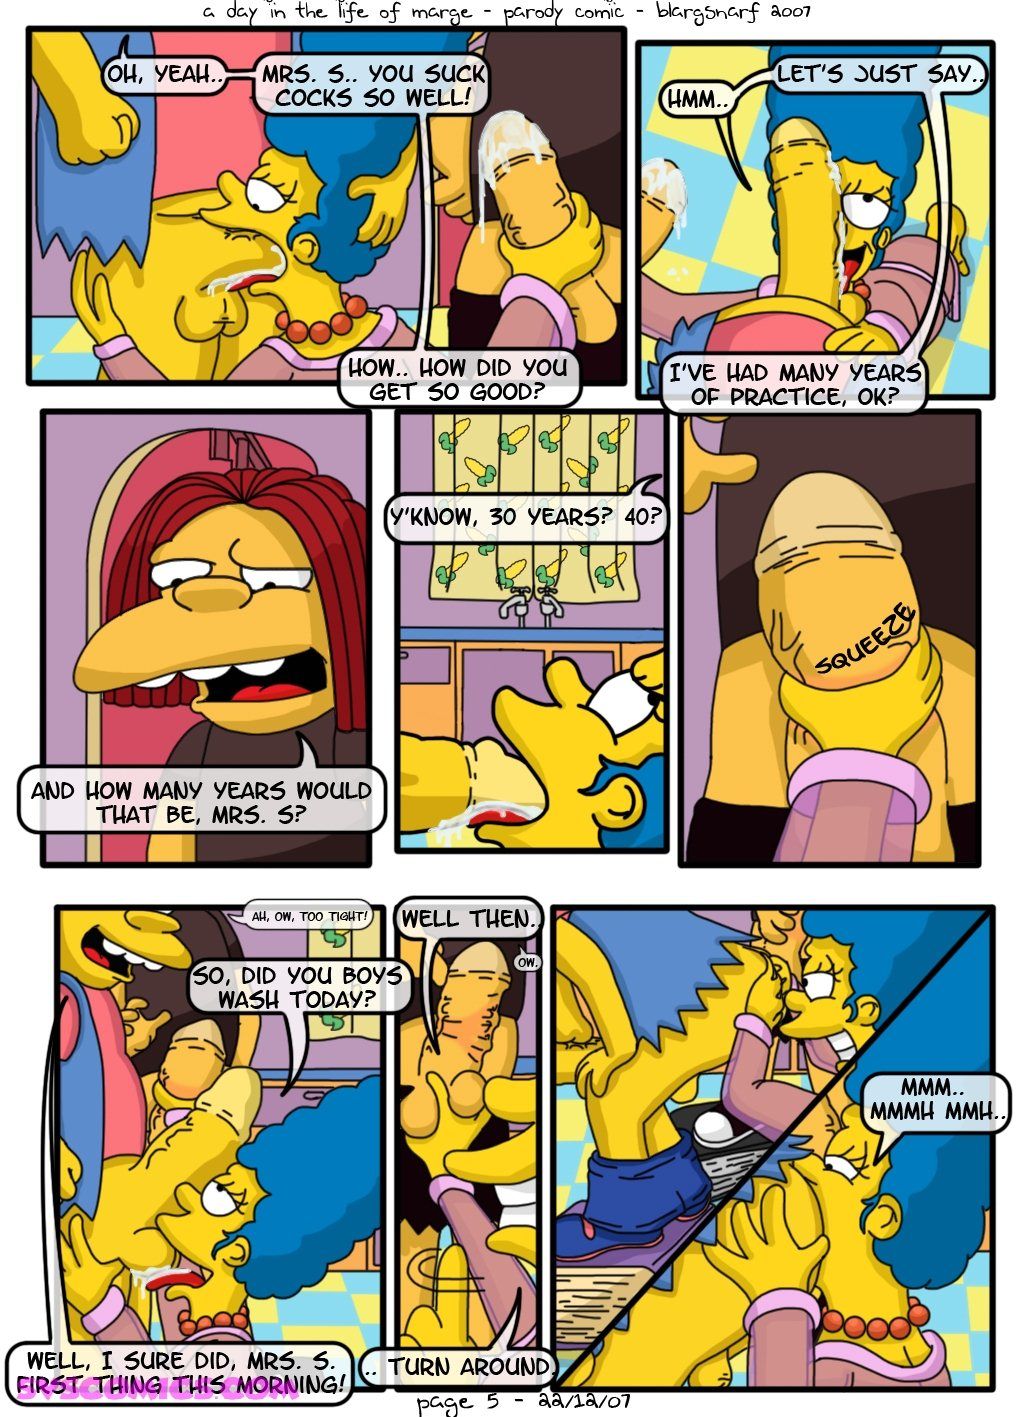 [Blargsnarf] A Day Life of Marge (The Simpsons) page 6